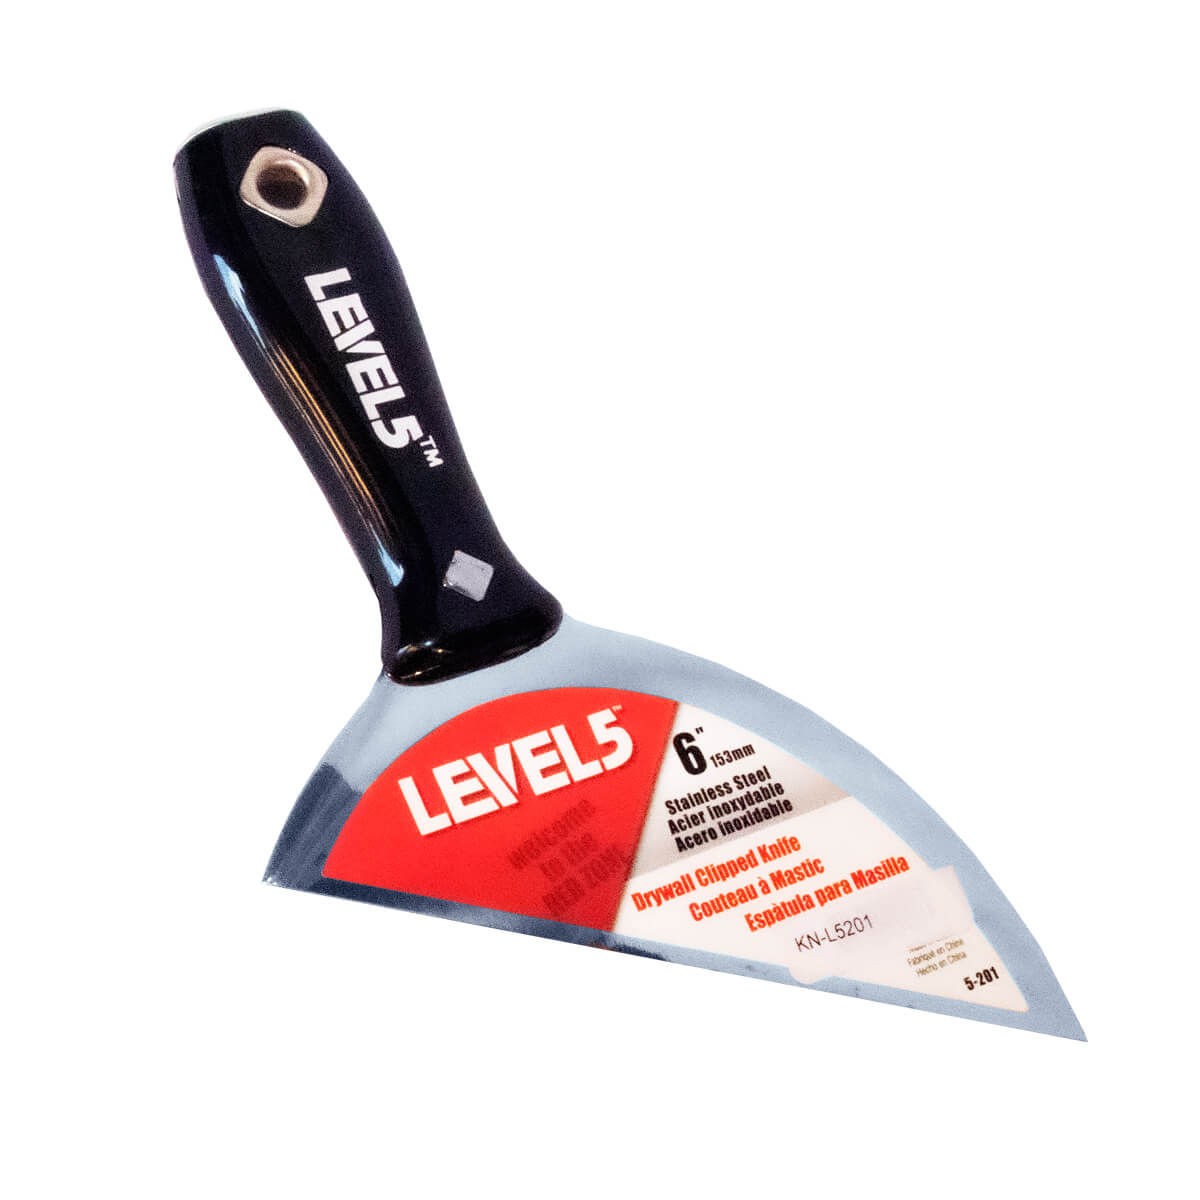 Joint Knife Stainless Clipped Level5 Tools